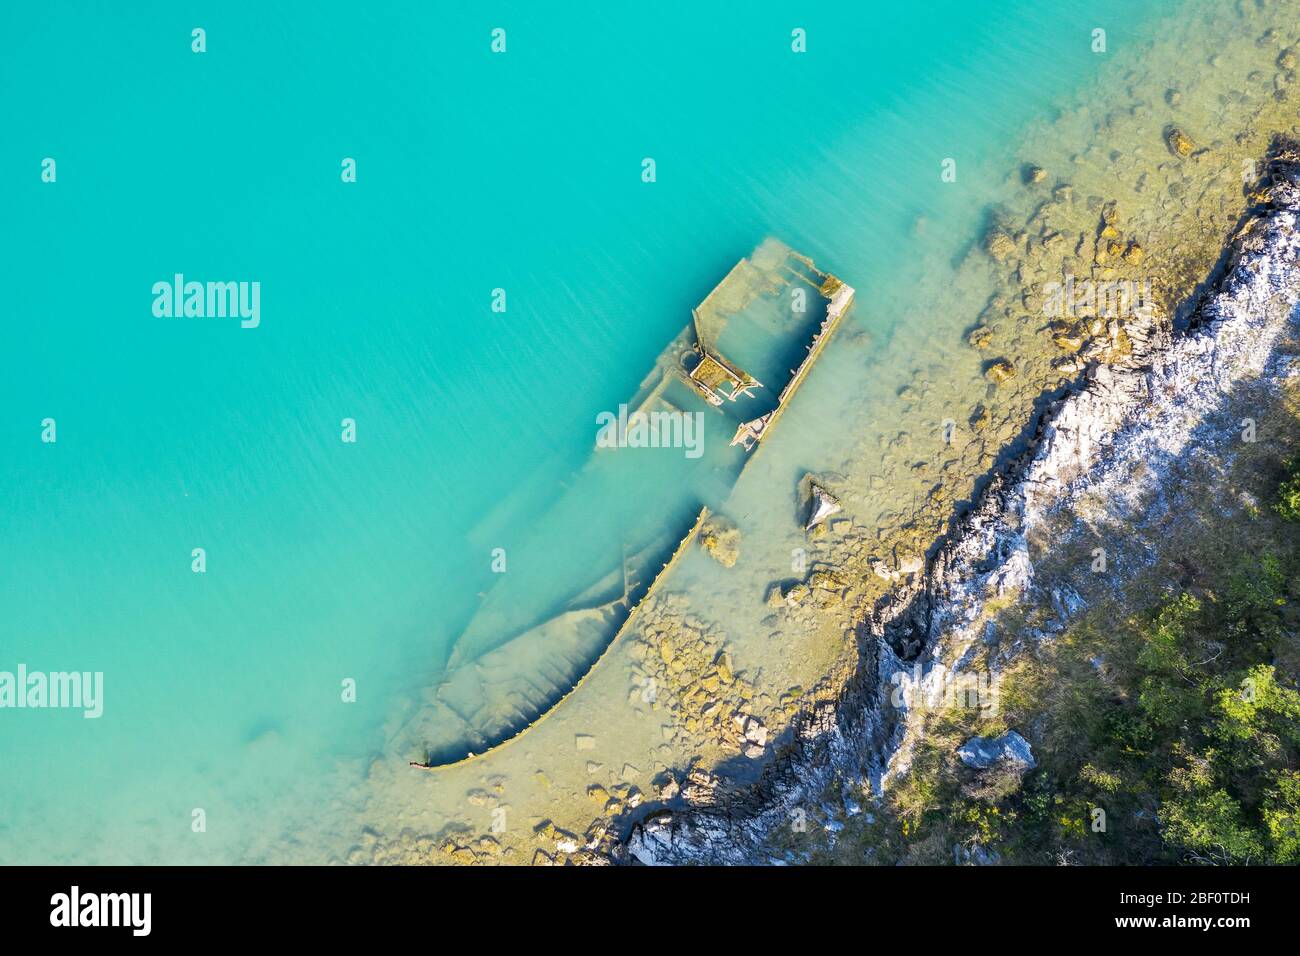 an aerial view of the sinking German ship Fritz from World War II in the bay of Salamustica in the Rasa bay, Istria, Croatia Stock Photo